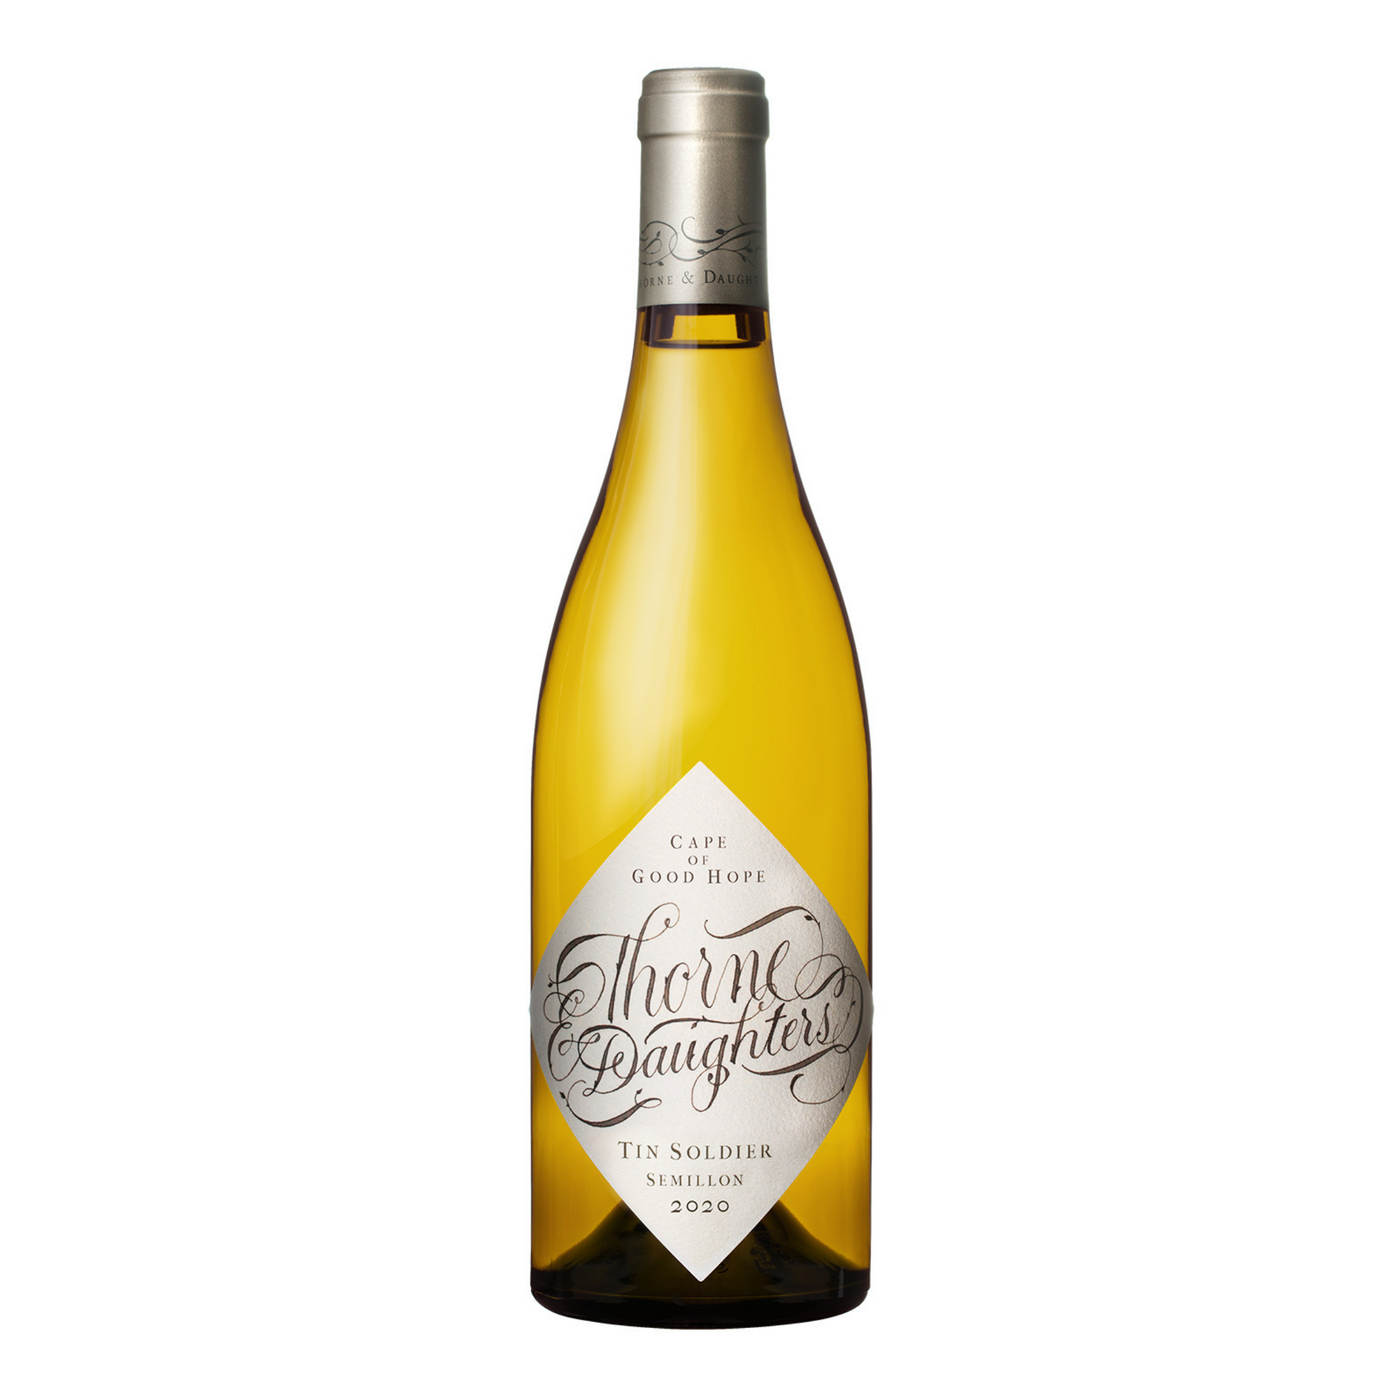 Thorne & Daughters Tin Soldier Semillon Gris 2020